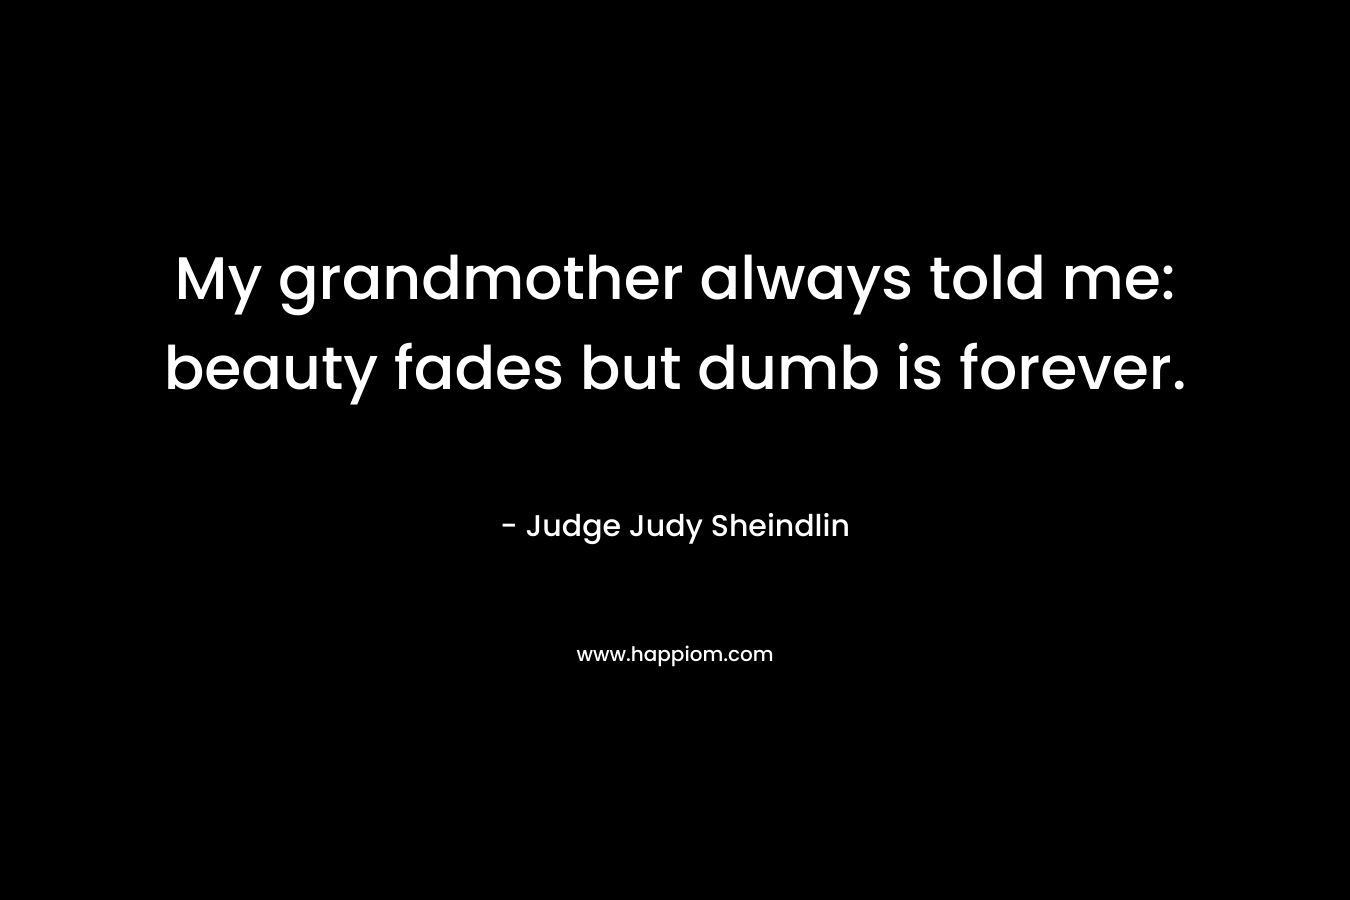 My grandmother always told me: beauty fades but dumb is forever. – Judge Judy Sheindlin